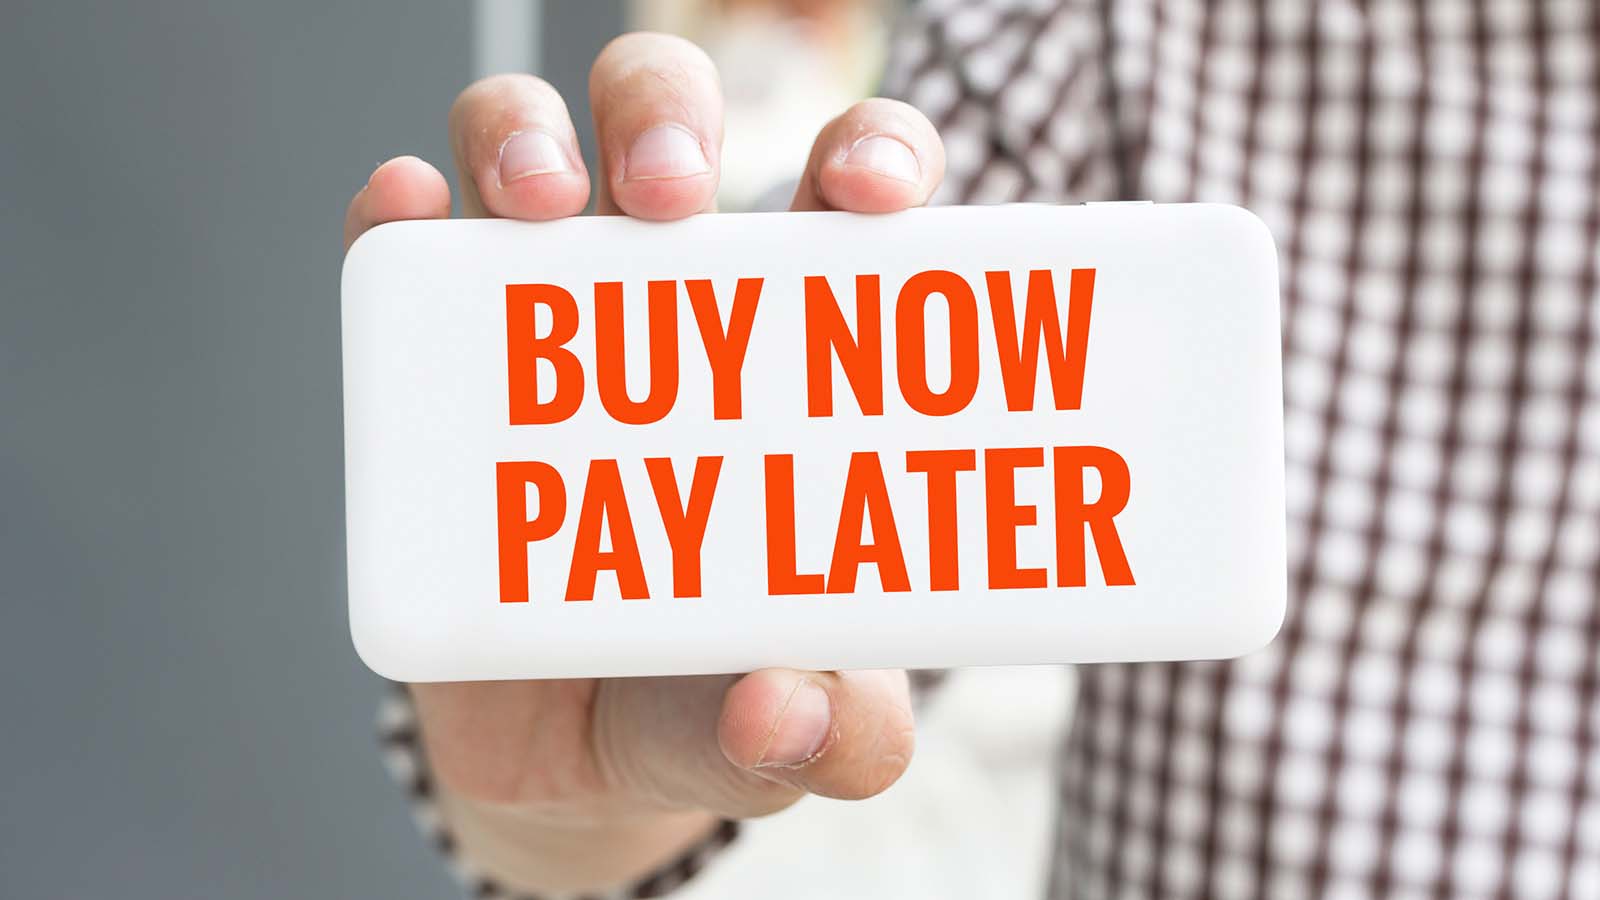 Buy Now, Pay Later (BNPL) Could Become a Multi-Trillion Dollar